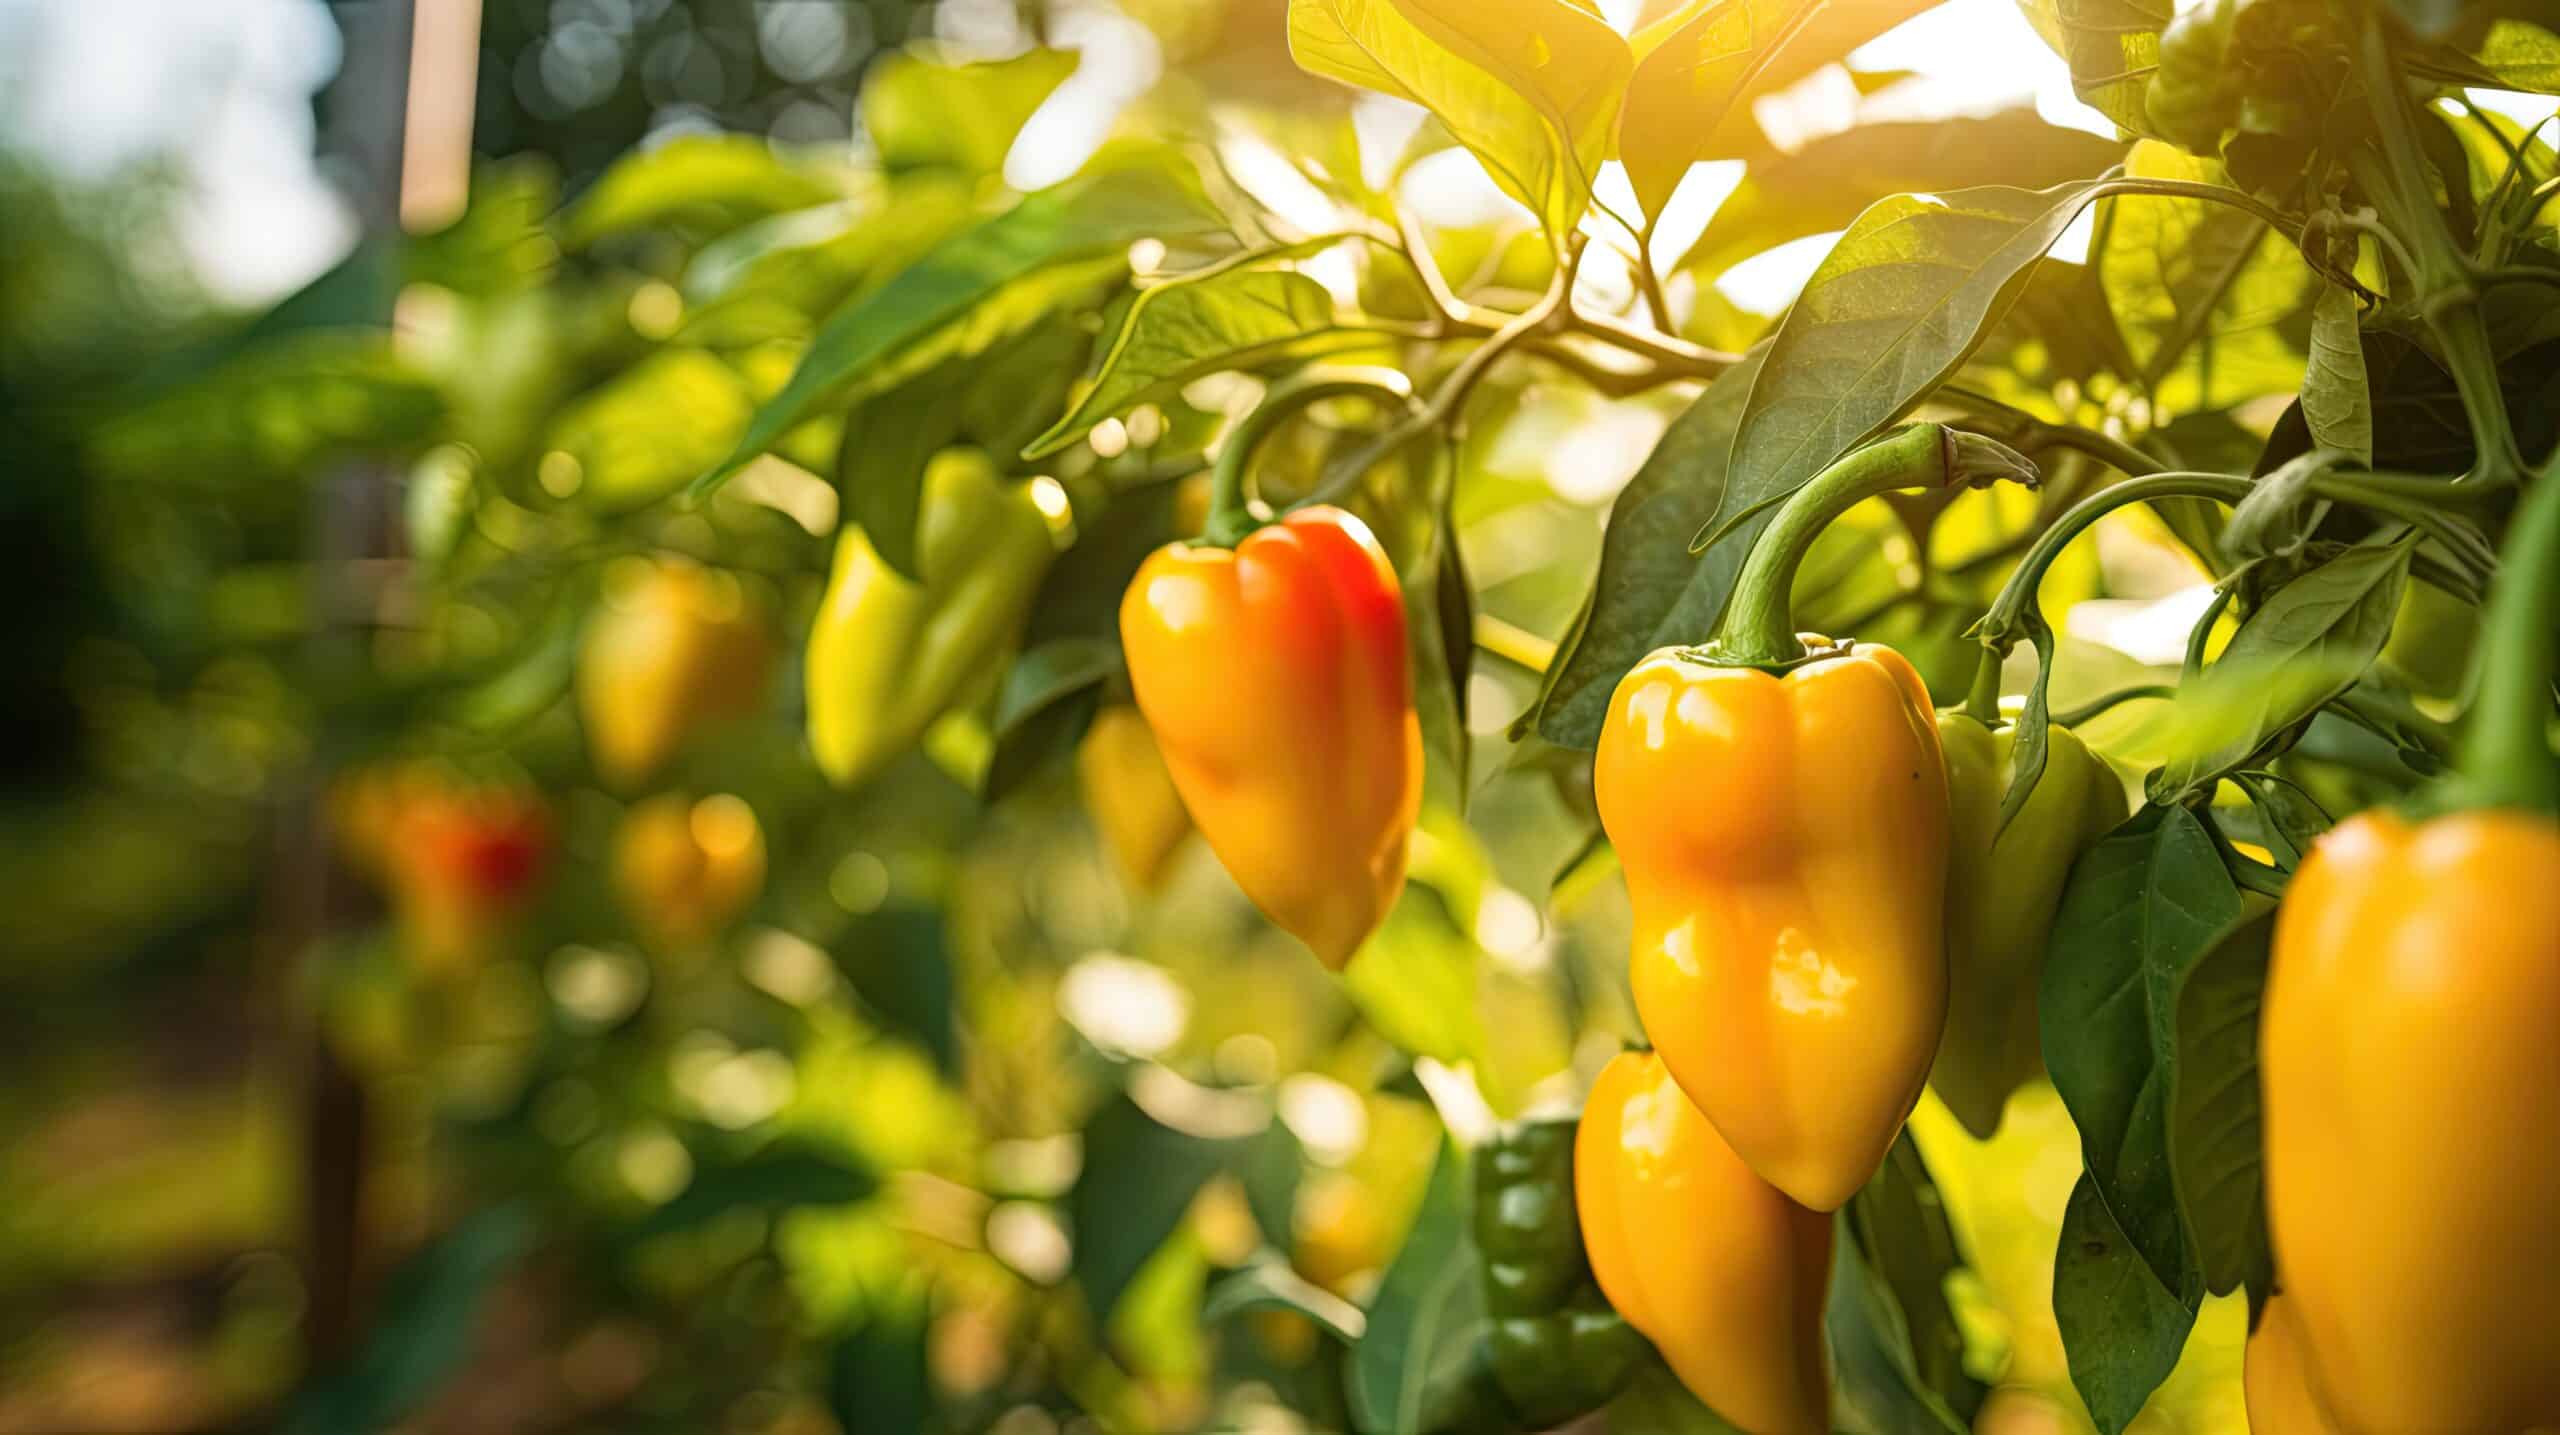 growmyownhealthfood.com : What not to plant next to peppers?